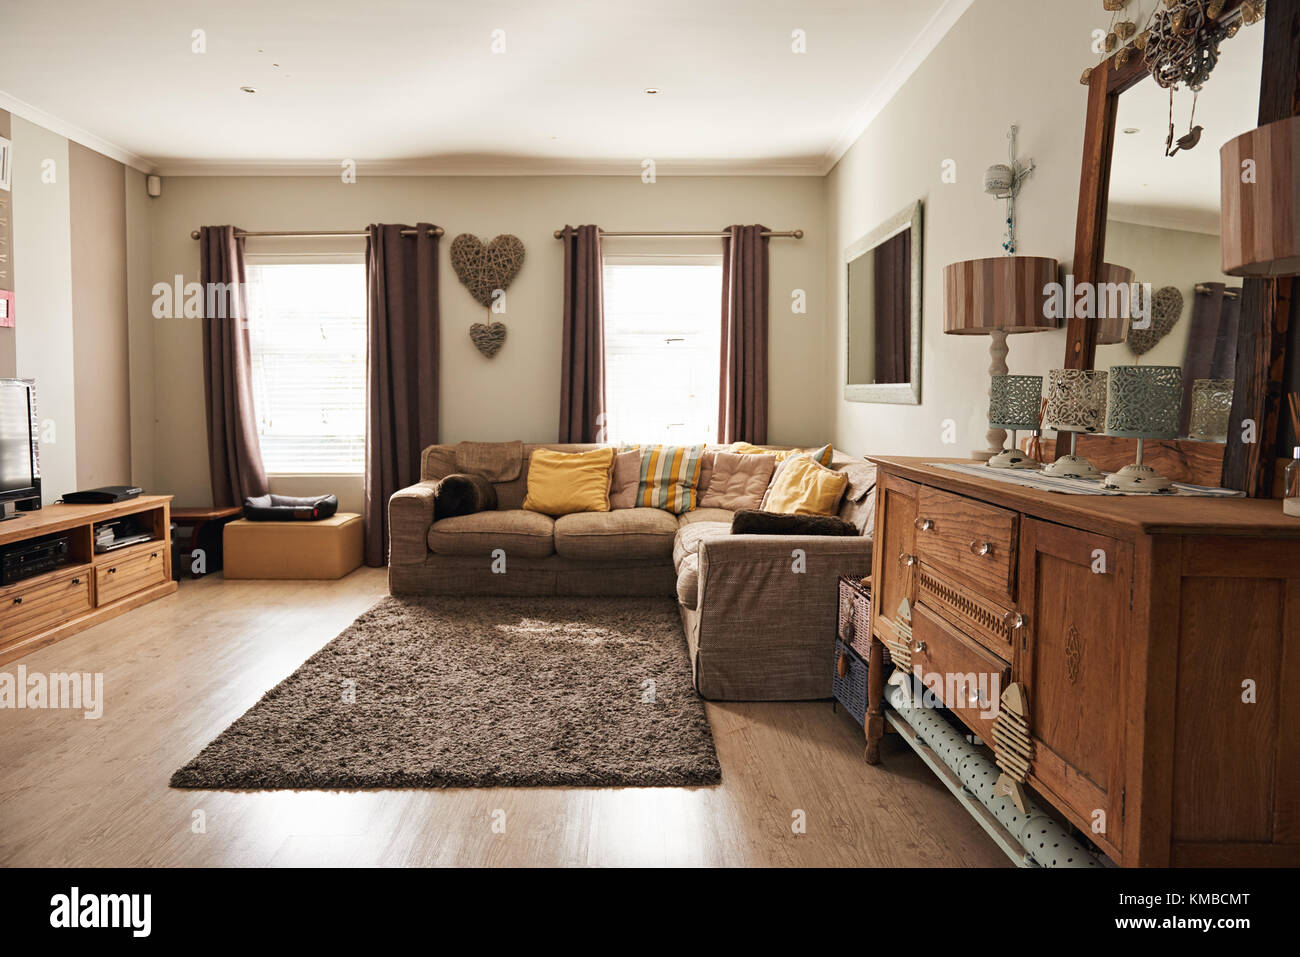 Interior of the living room of a suburban home Stock Photo